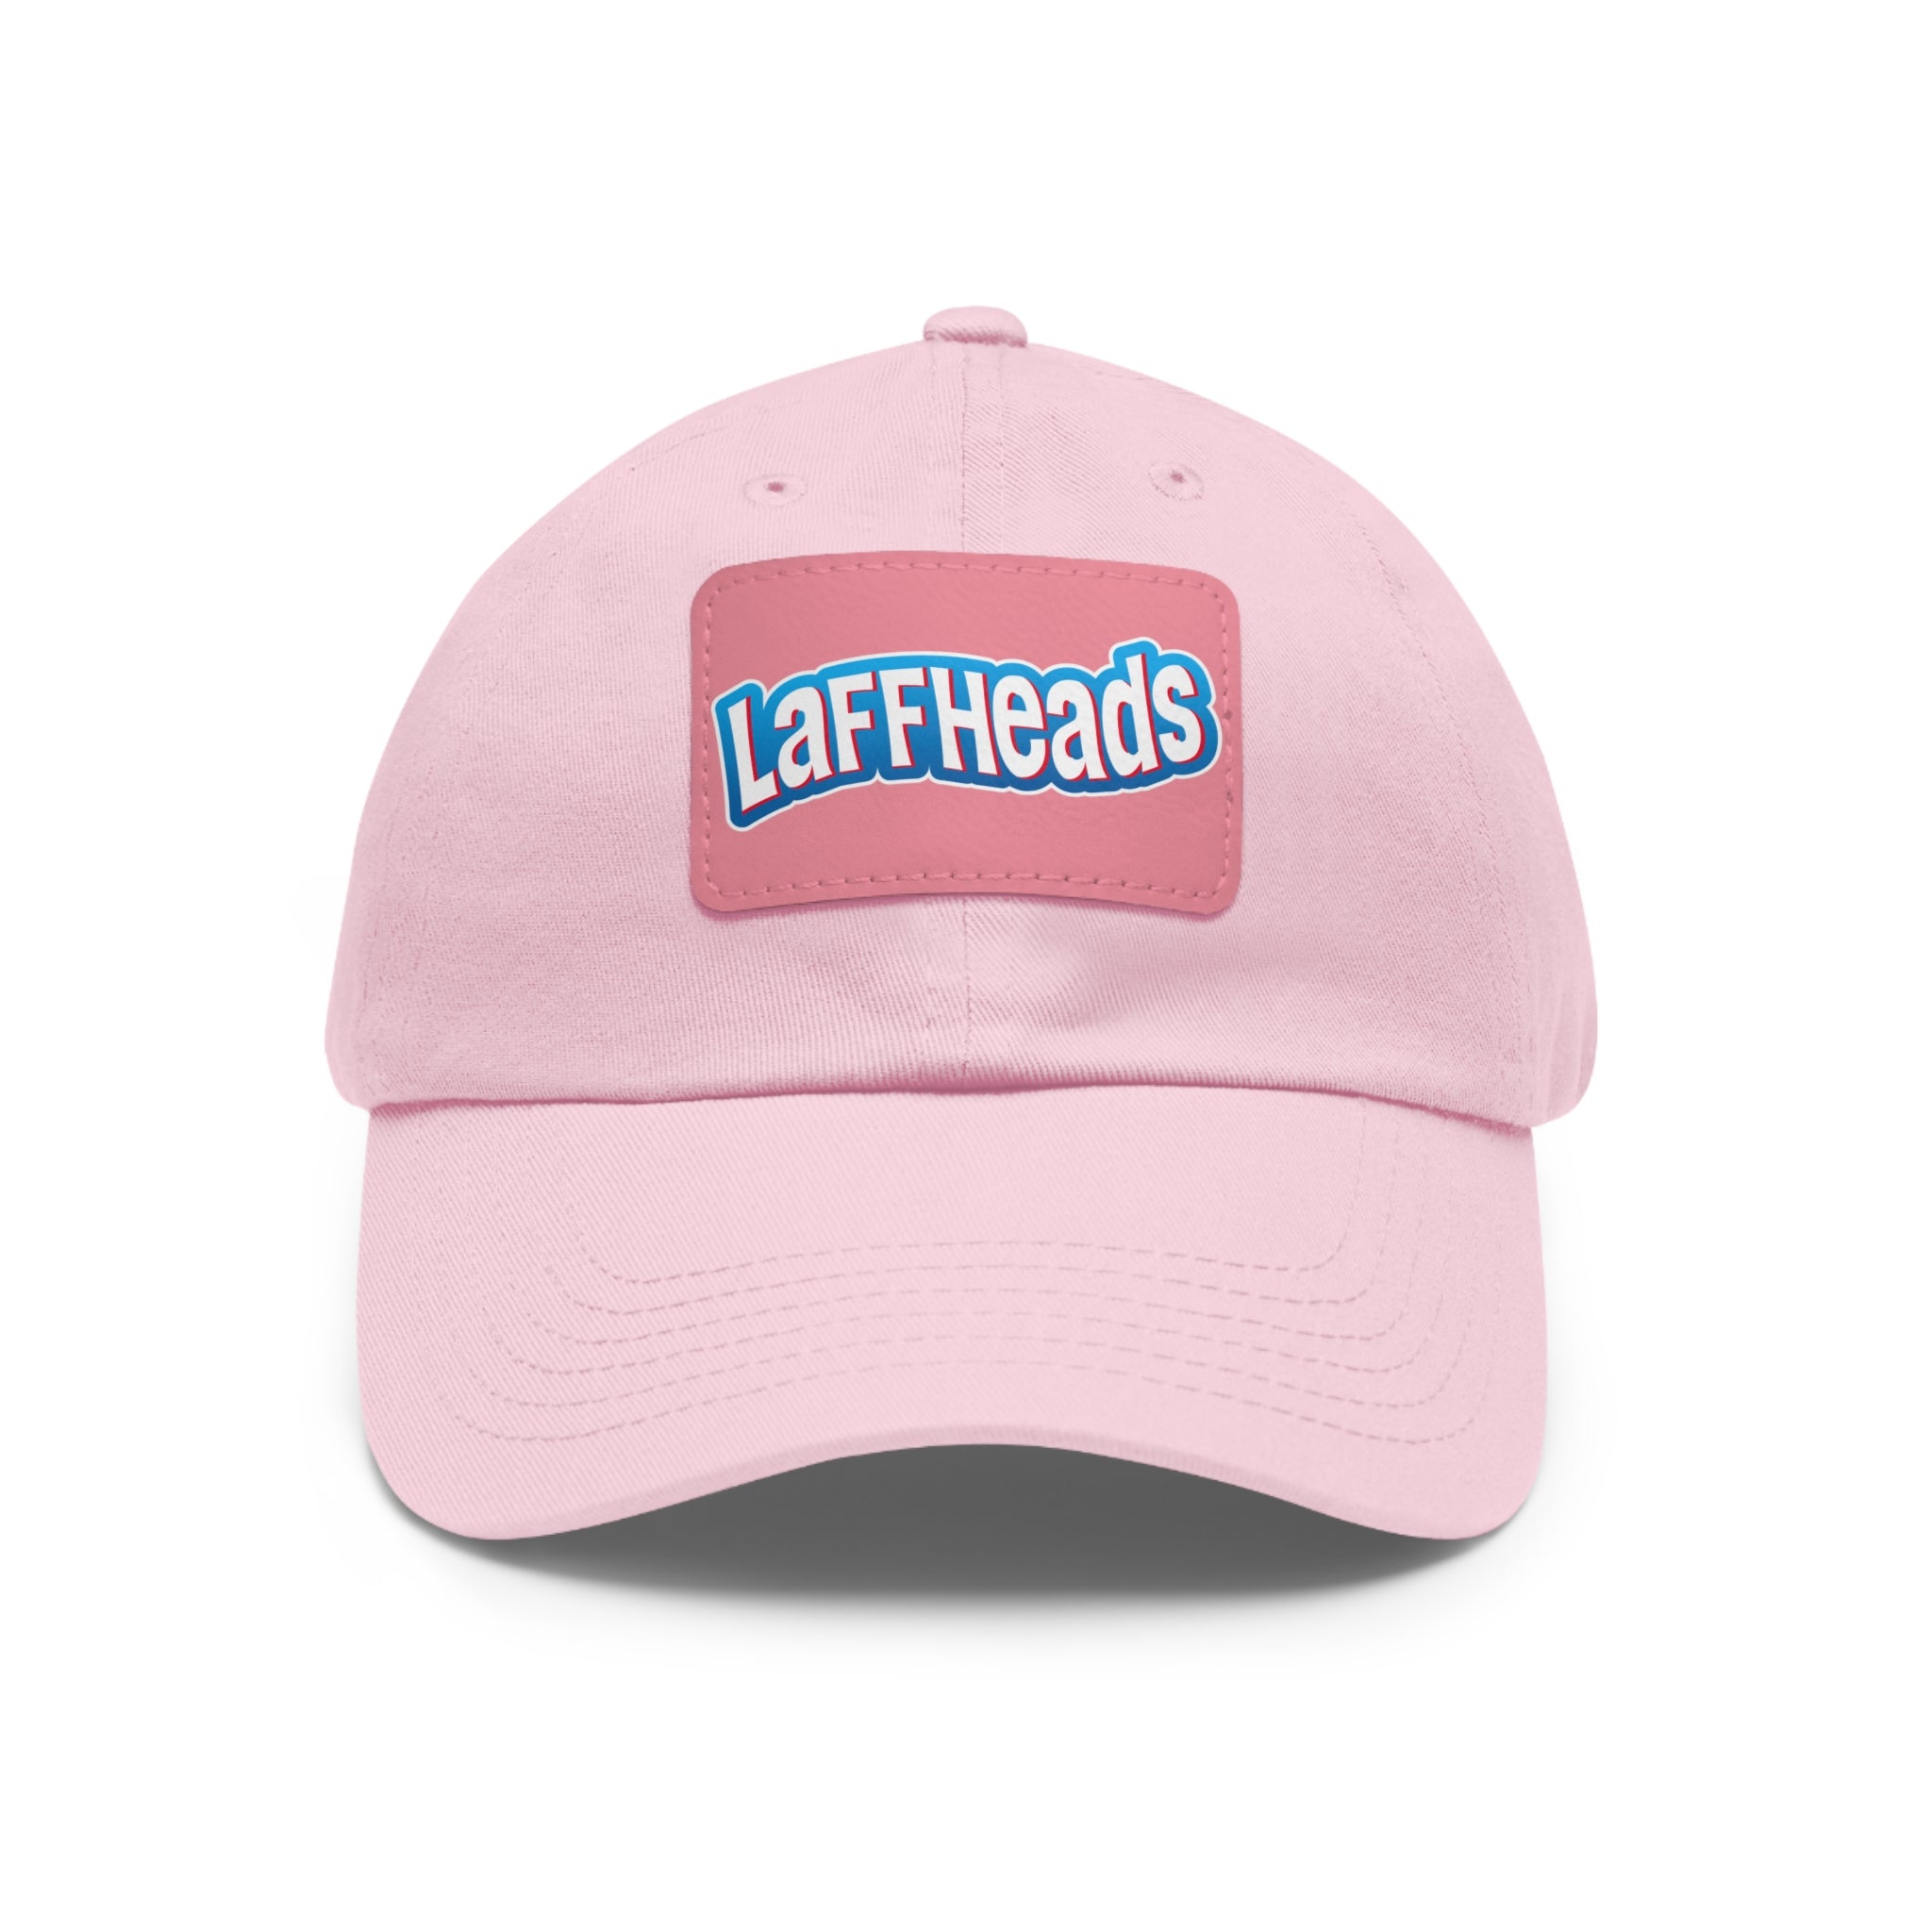 laffheads-hat-with-leather-patch-rectangle